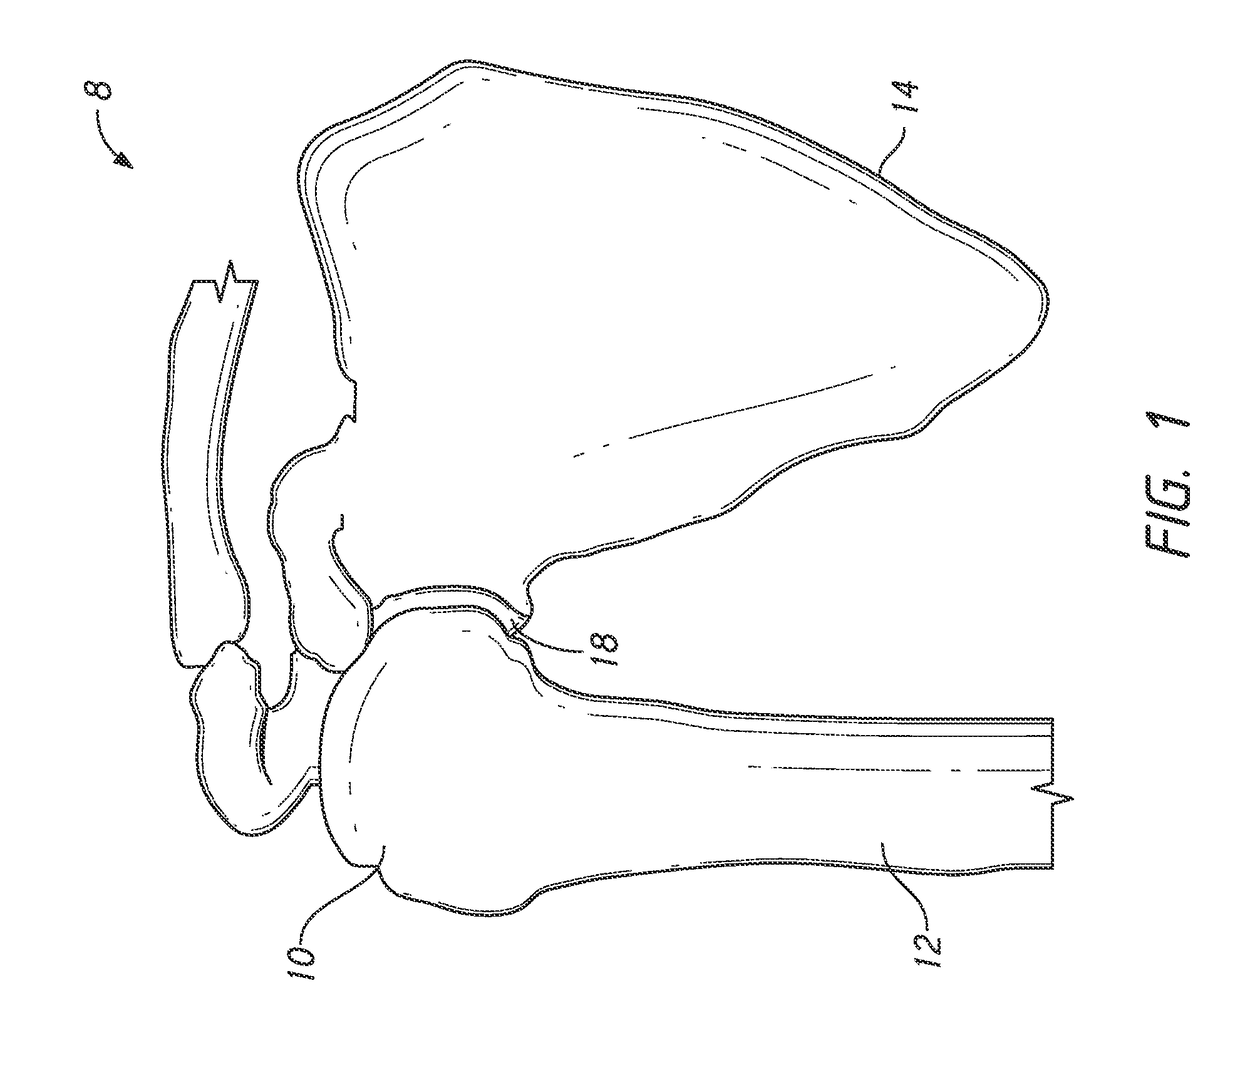 Guides and instruments for improving accuracy of glenoid implant placement